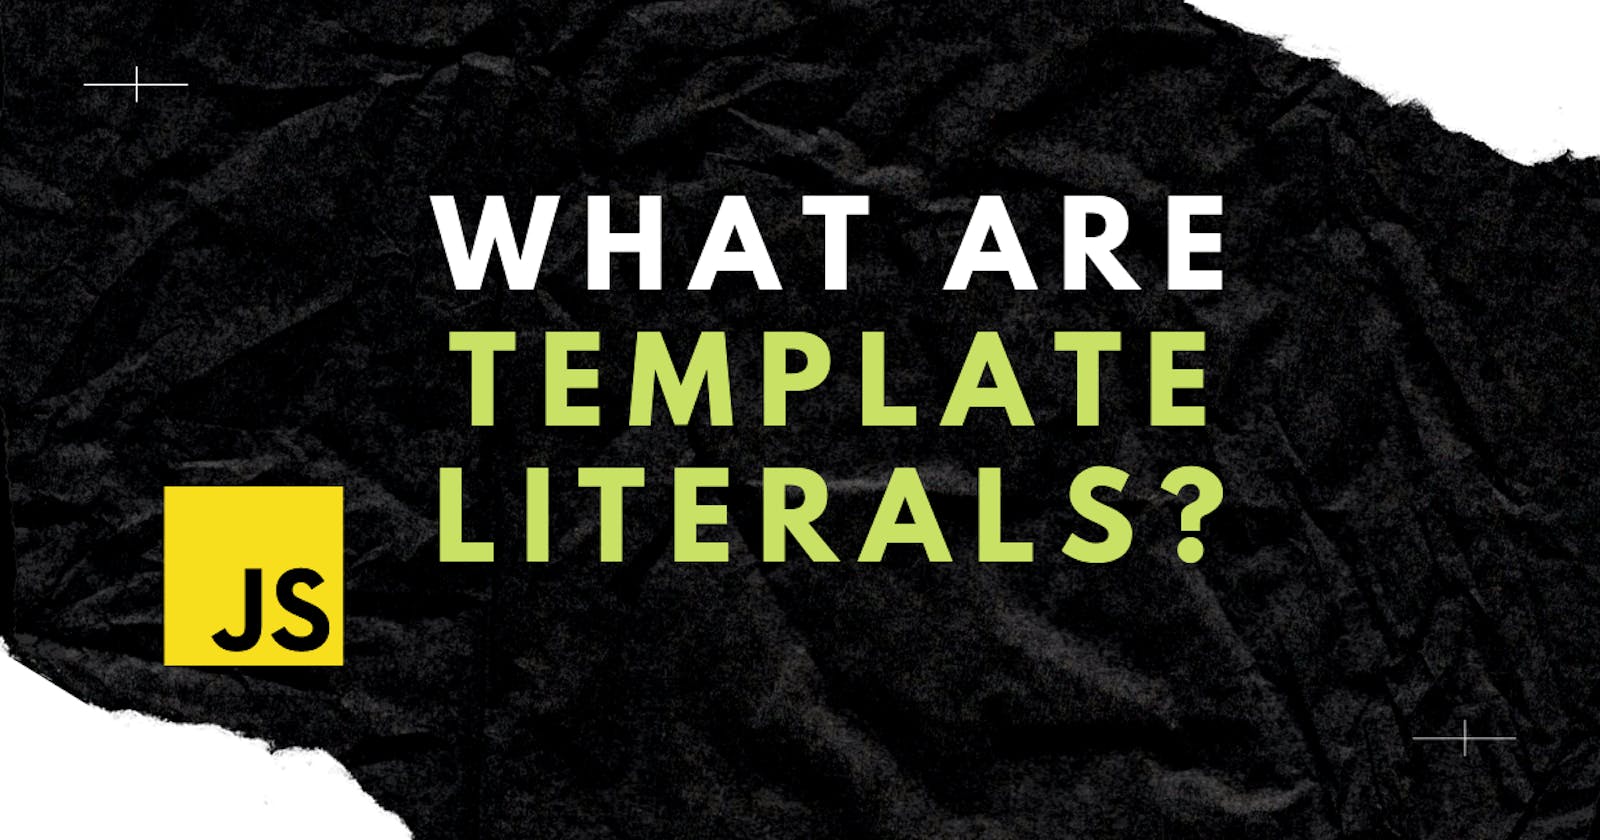 What are Template Literals?